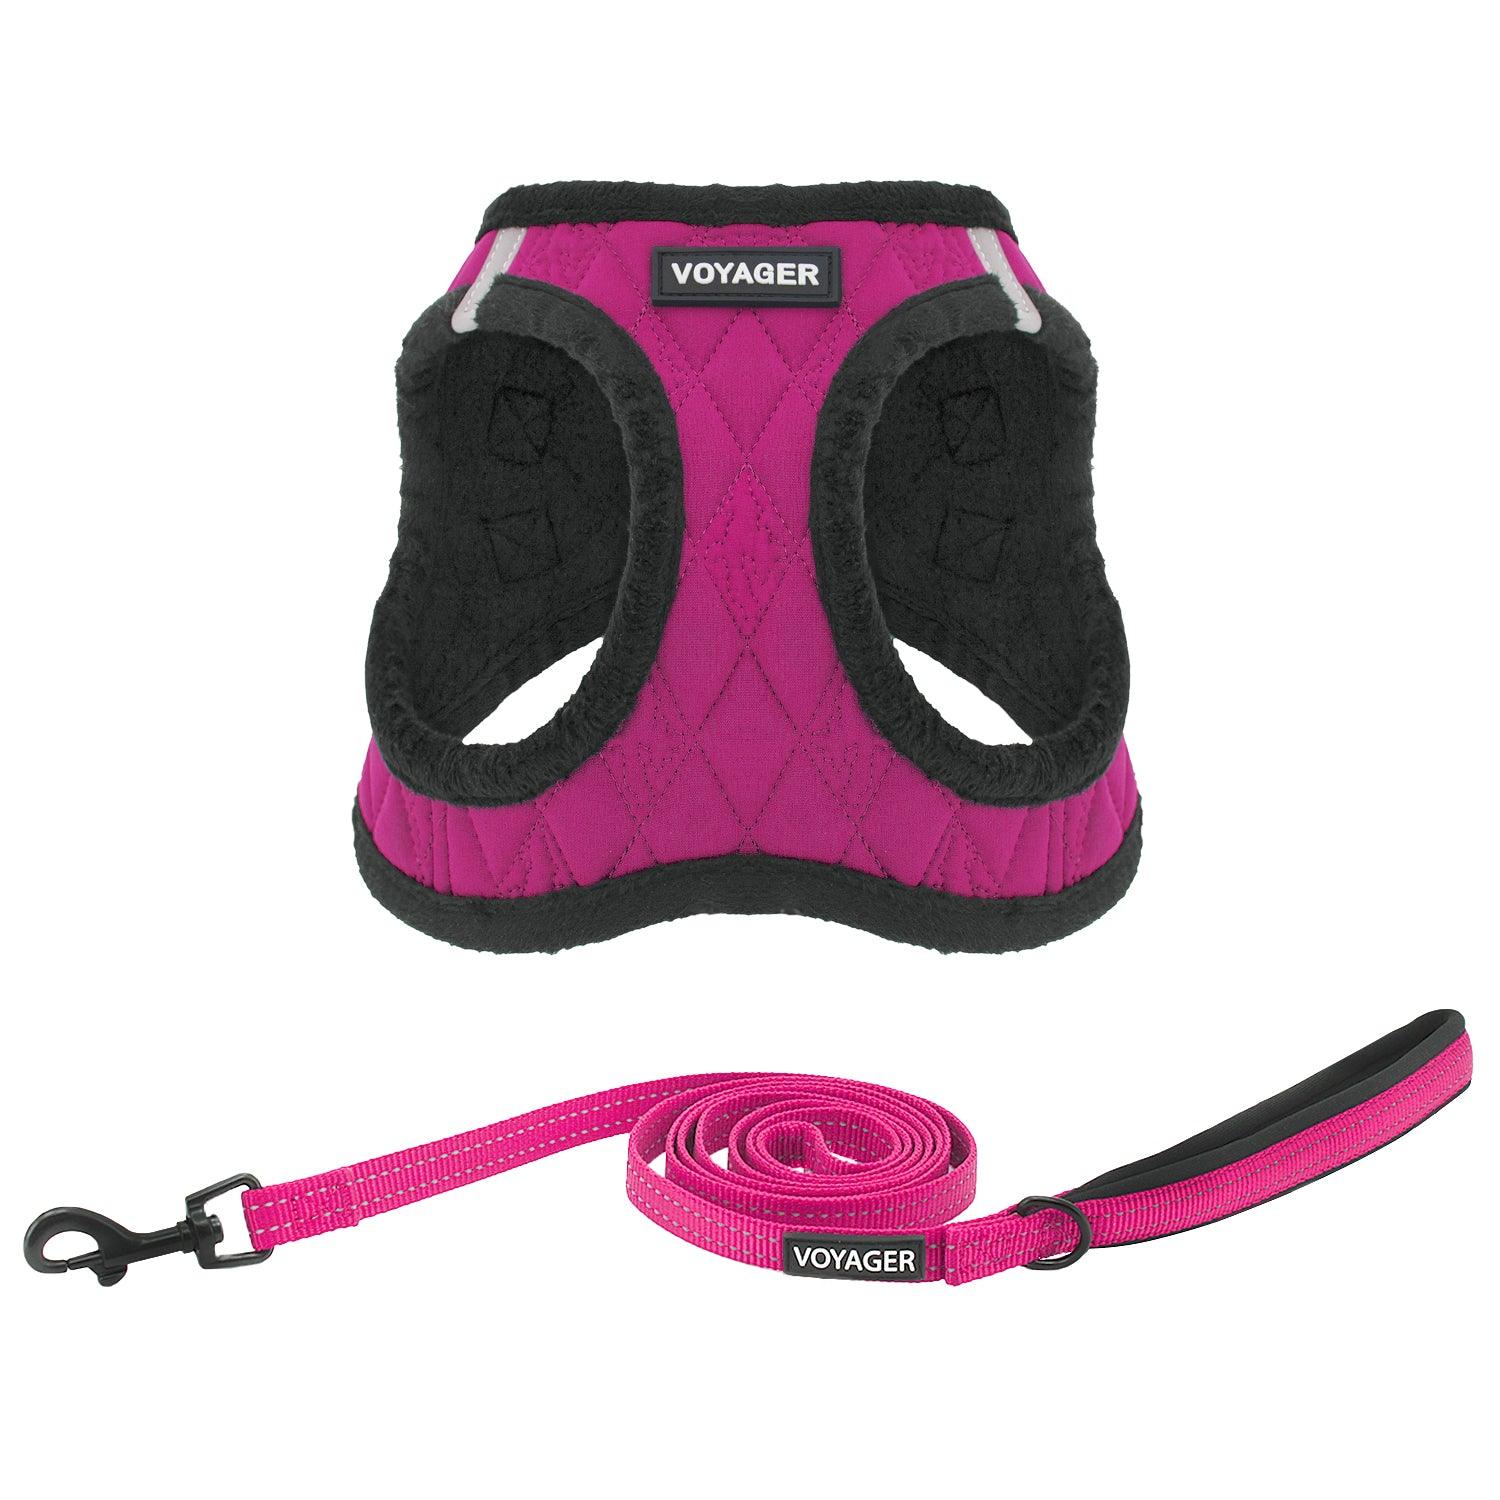 Step-In Plush Harness & Leash Combo Set - VOYAGER Dog Harnesses